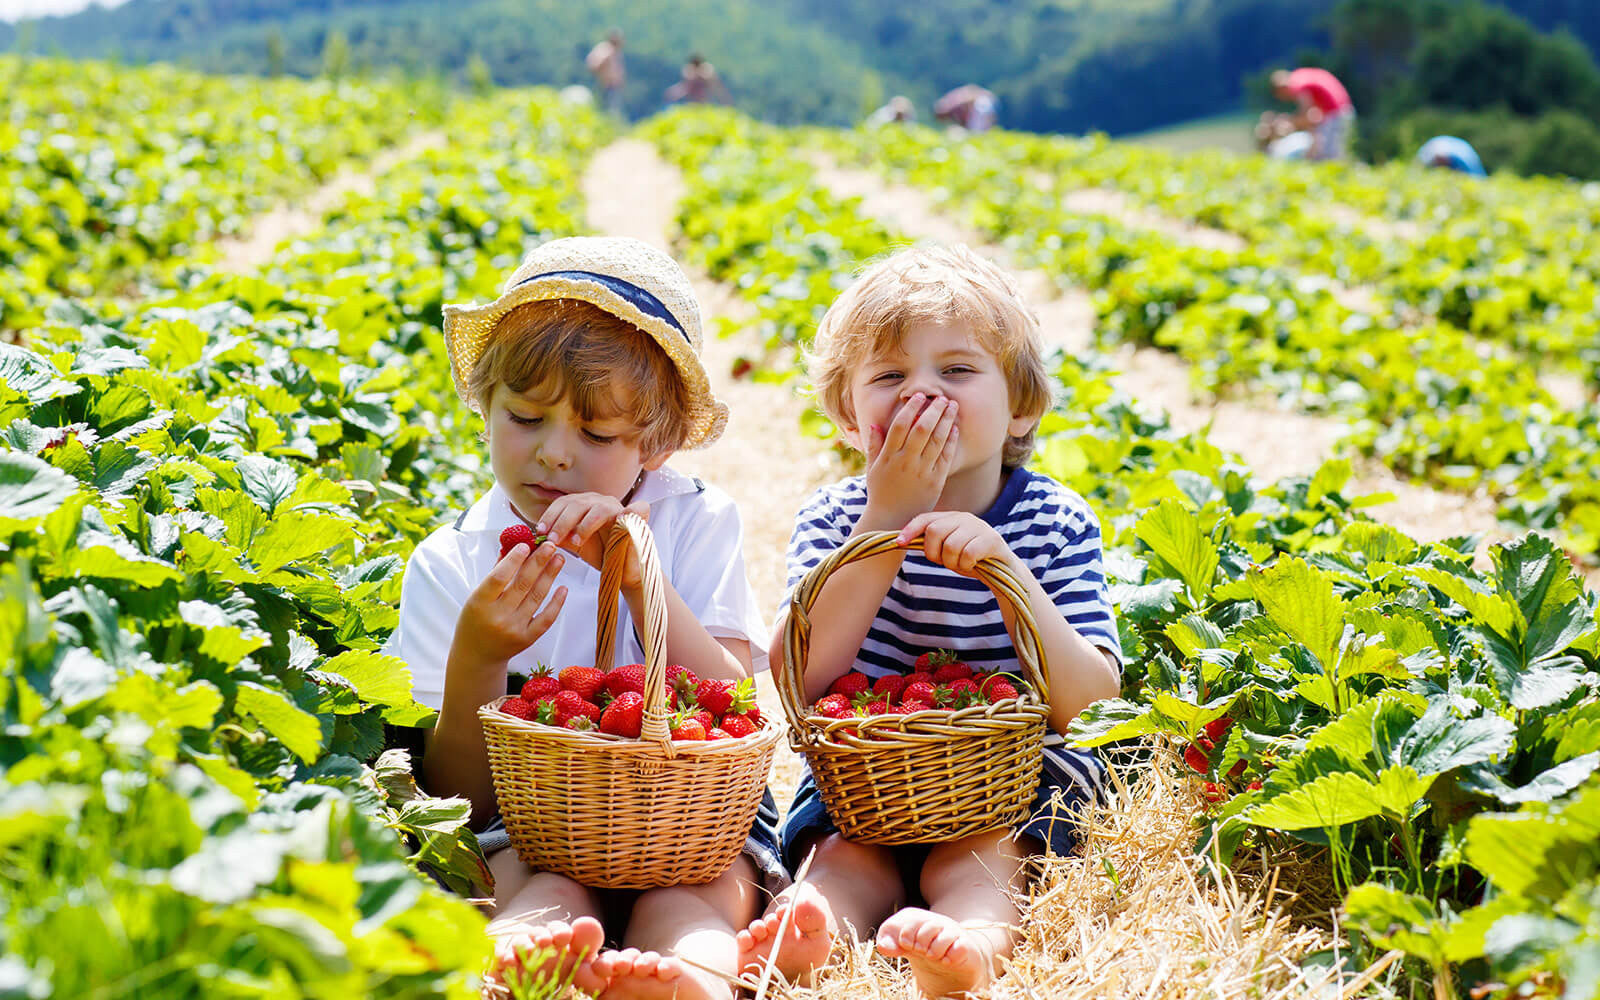 Strawberry pickings are fun for the children